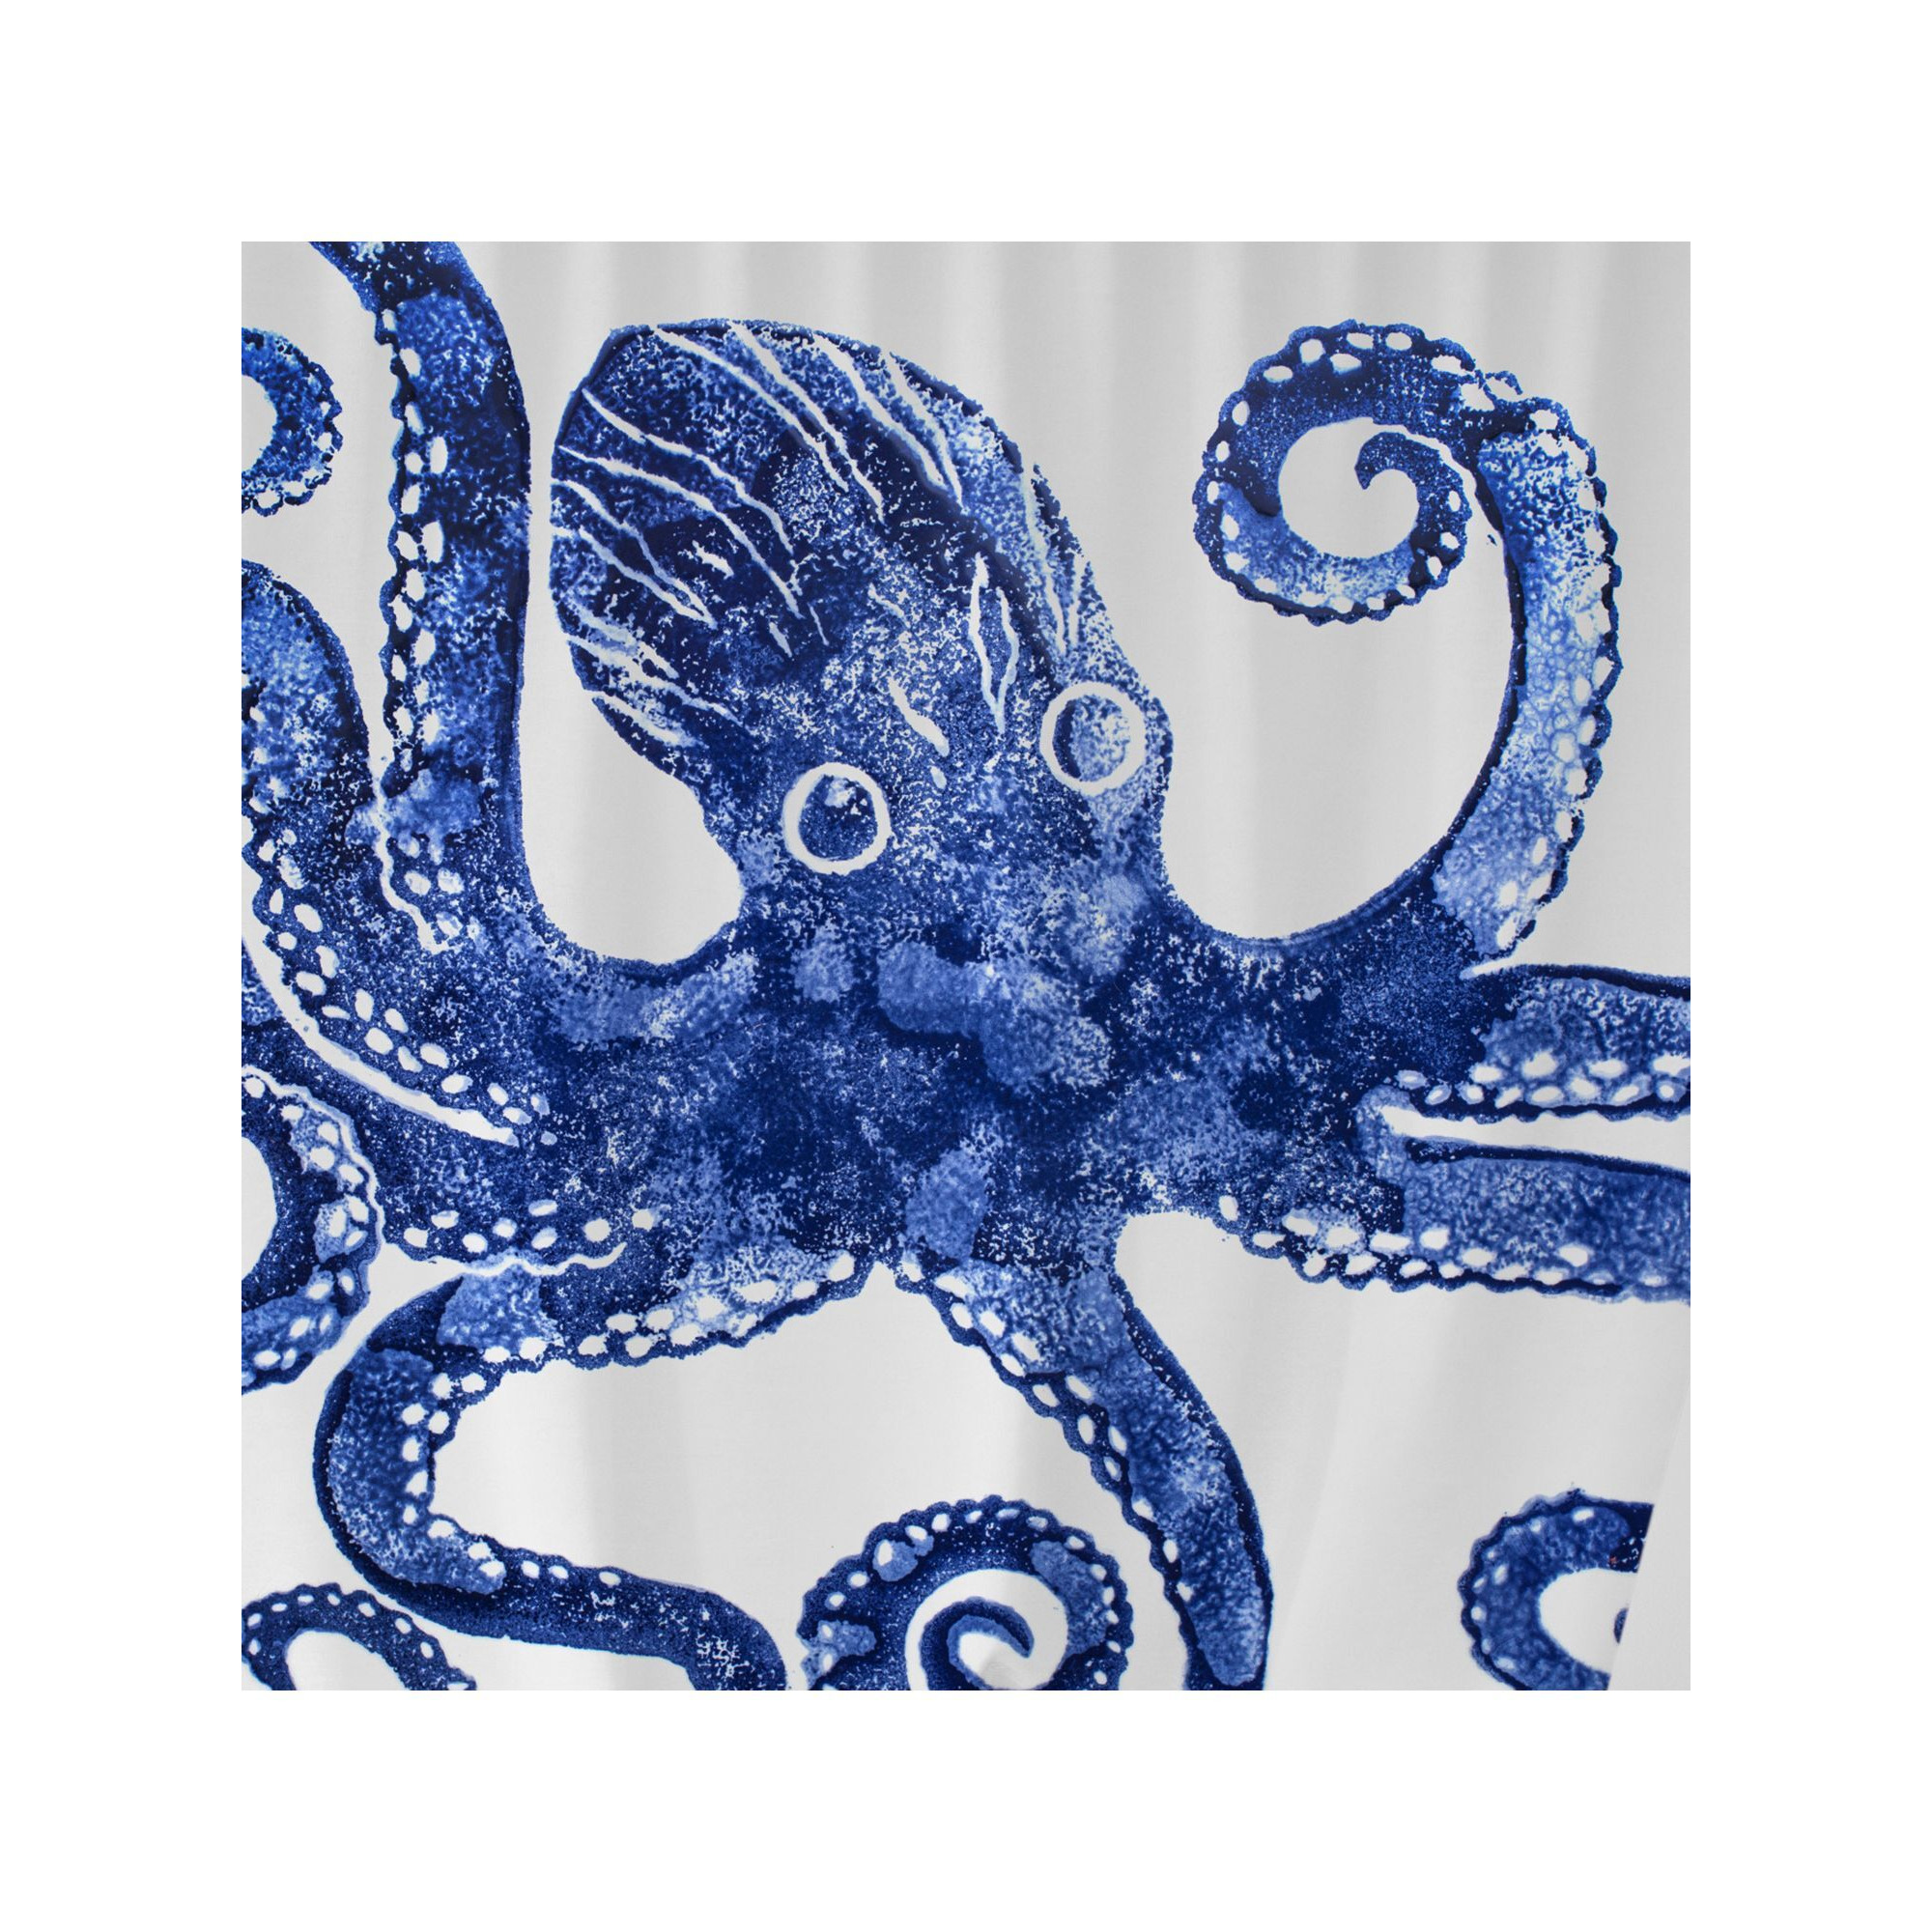 bliss Creatures Octopus Shower Curtain, Blue - image 1